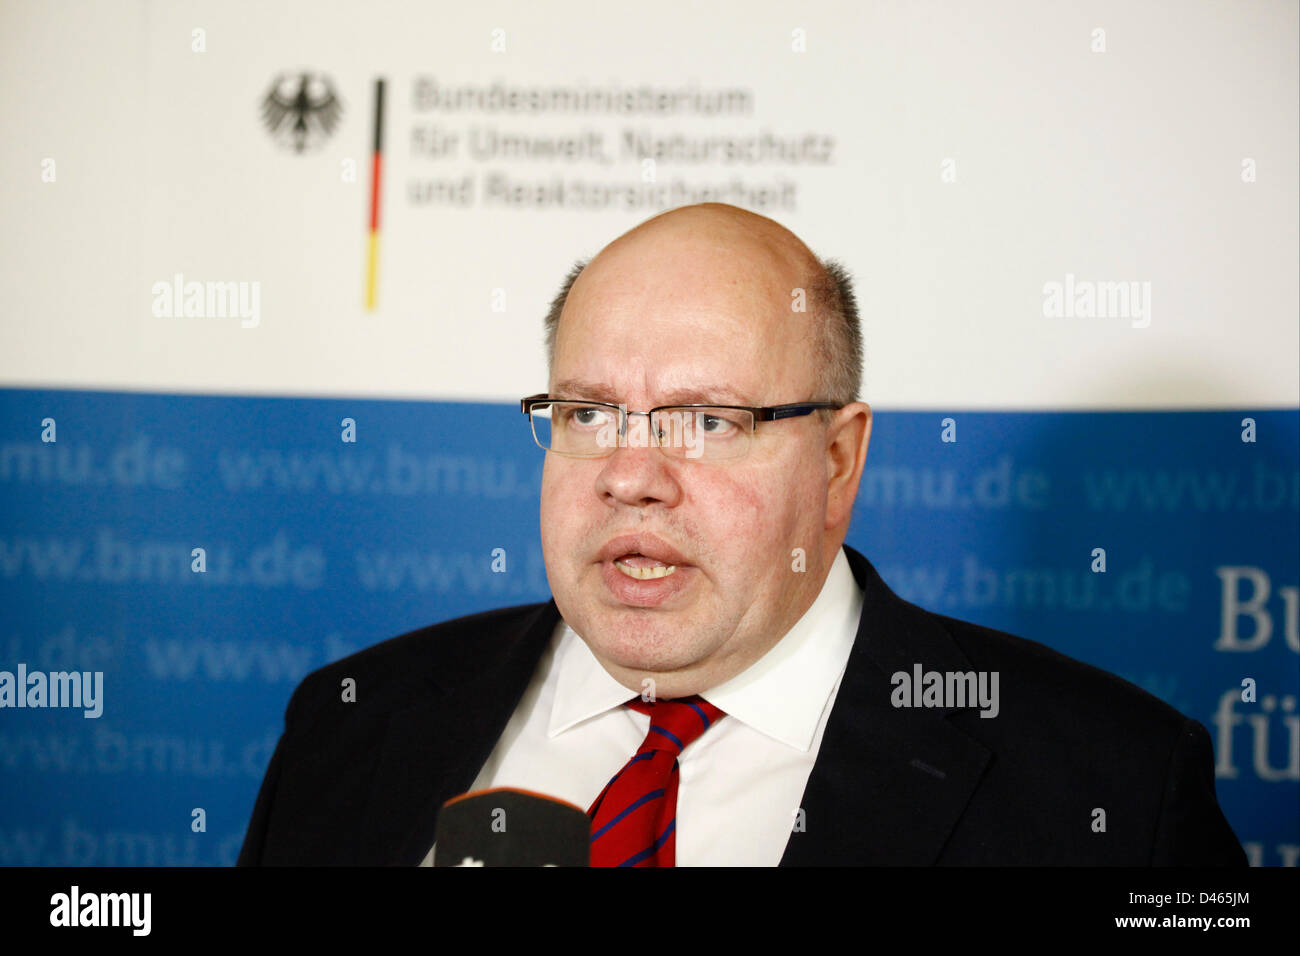 Berlin, Germany. 6th March 2013. Federal Environment Minister Peter Altmaier meets Austrian Economy Minister Reinhold Mitterlehner at the Federal Environment Ministry in Berlin. On picture: Peter Altmaier (CDU), Federal Minister of Environment, giving an interview. Credit:  Reynaldo Chaib Paganelli / Alamy Live News Stock Photo